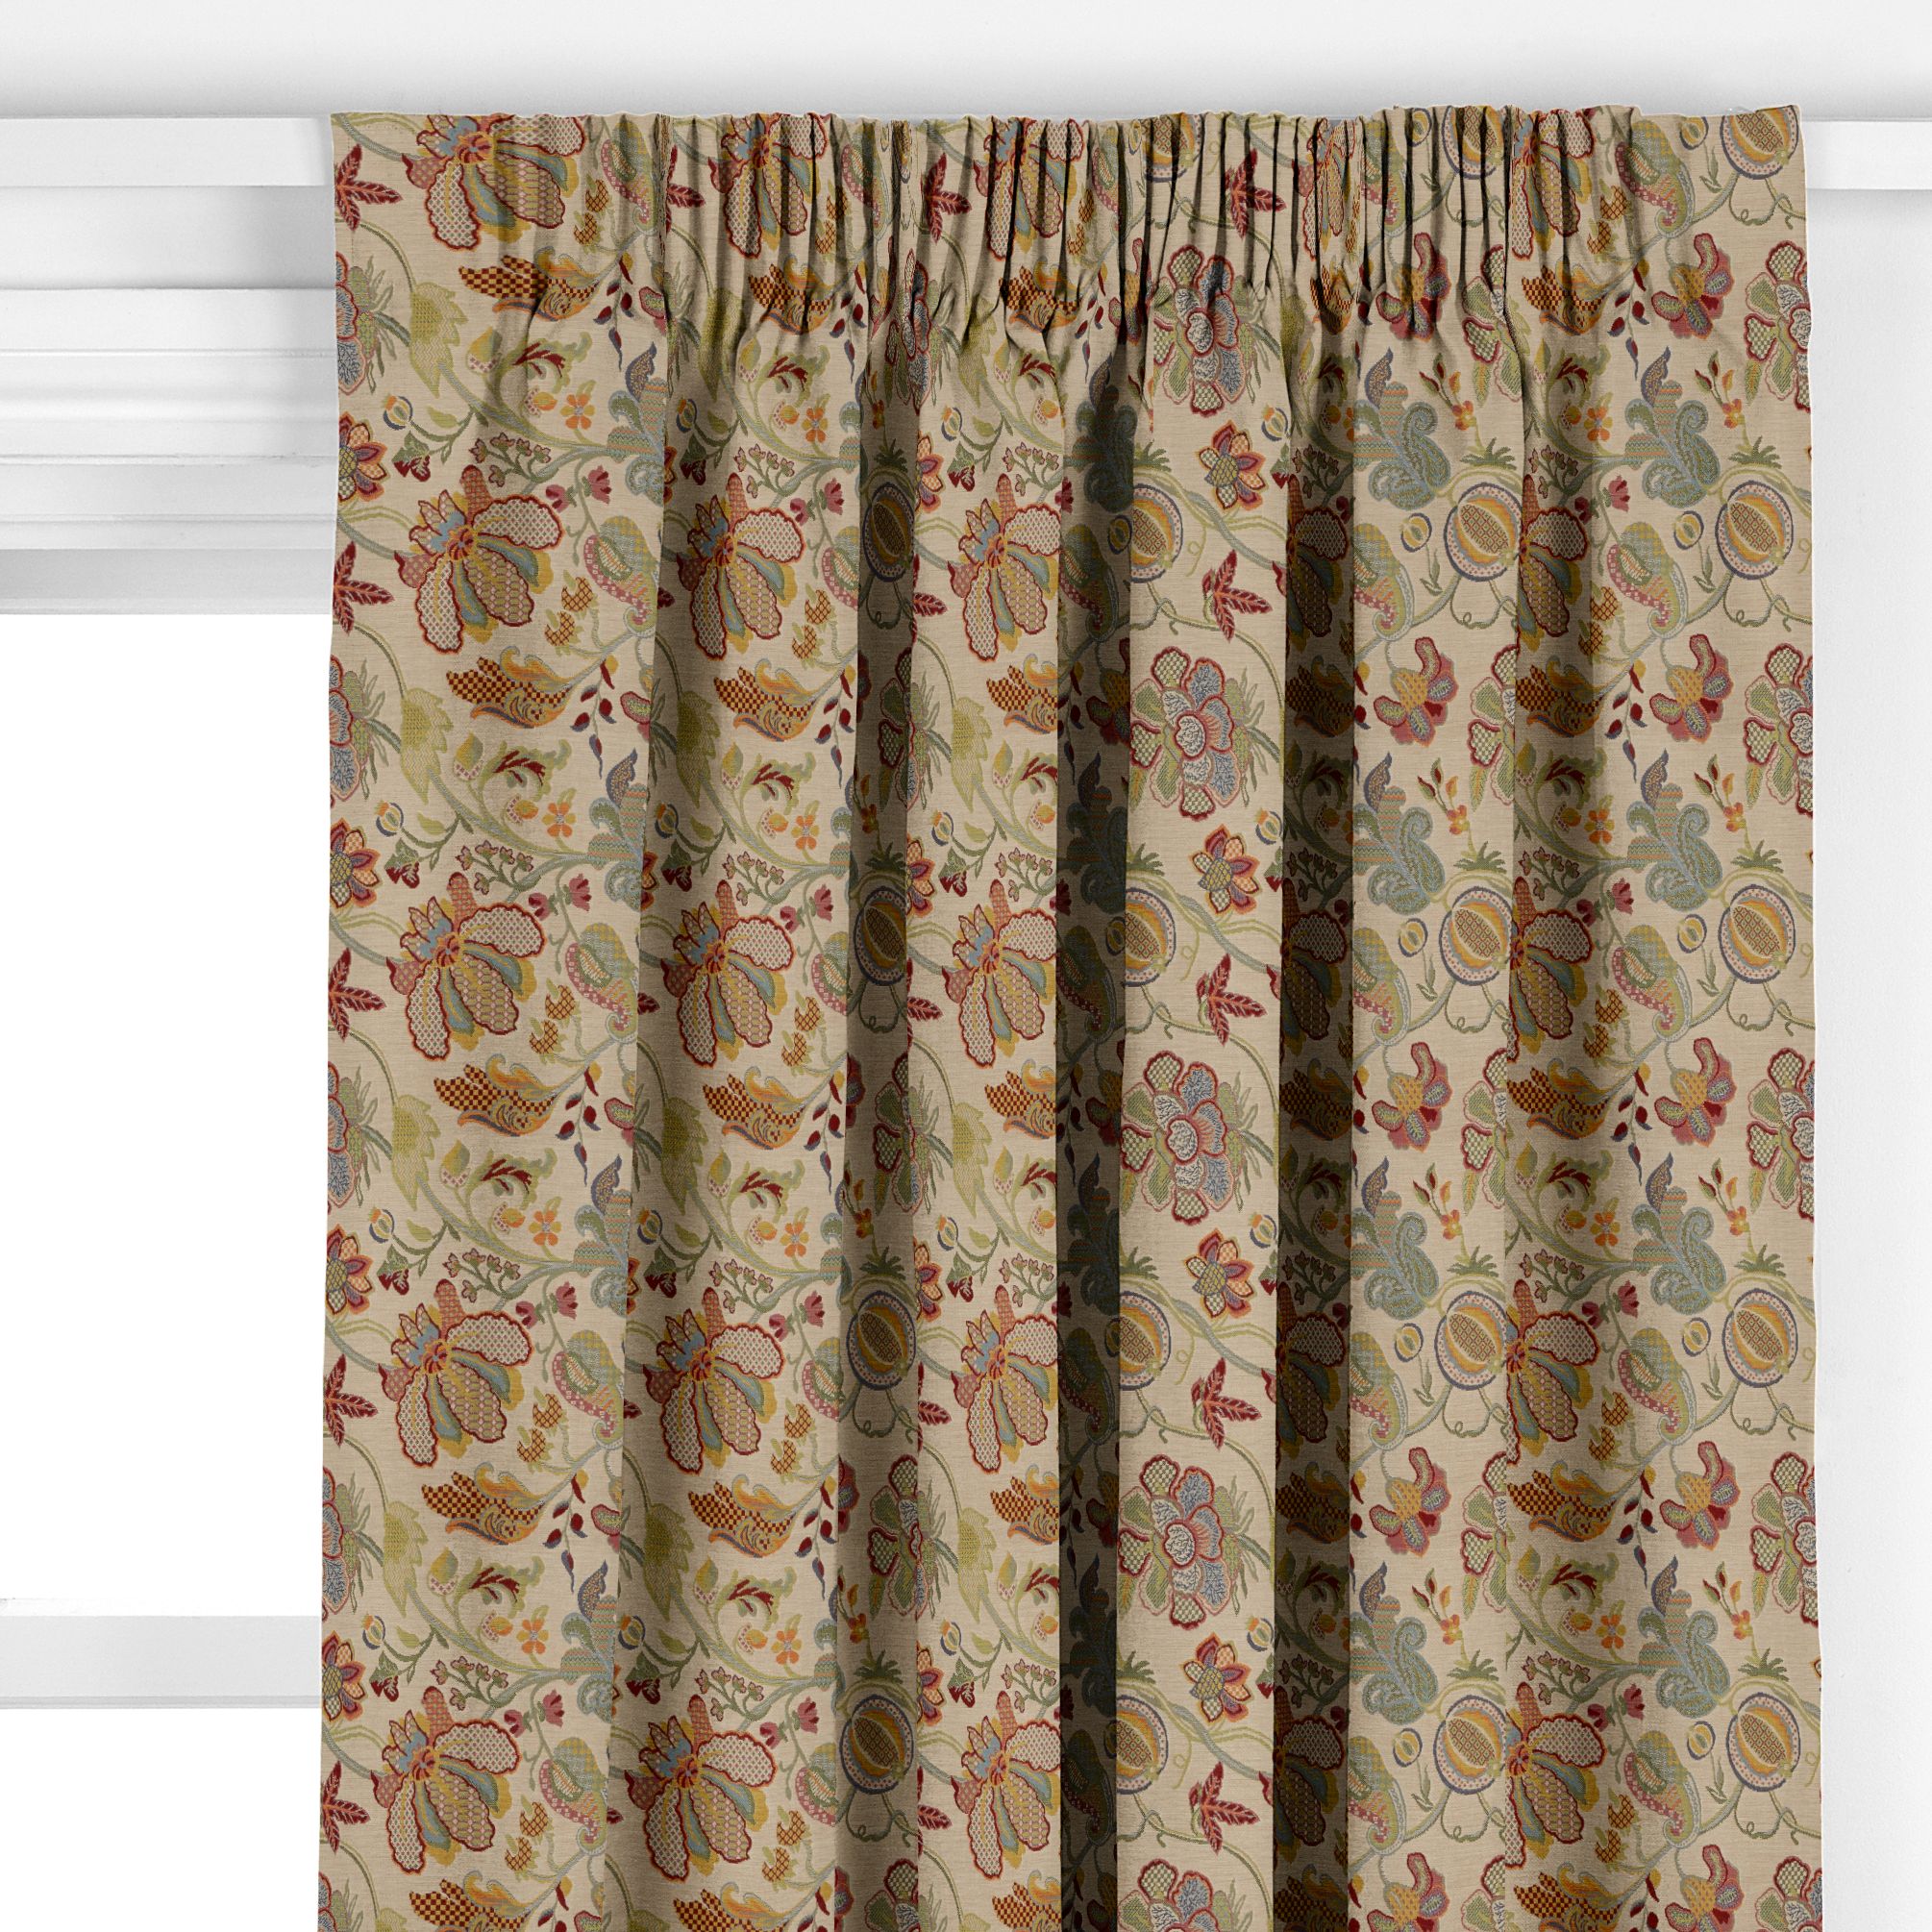 John Lewis Fotheringay Made to Measure Curtains, Multi